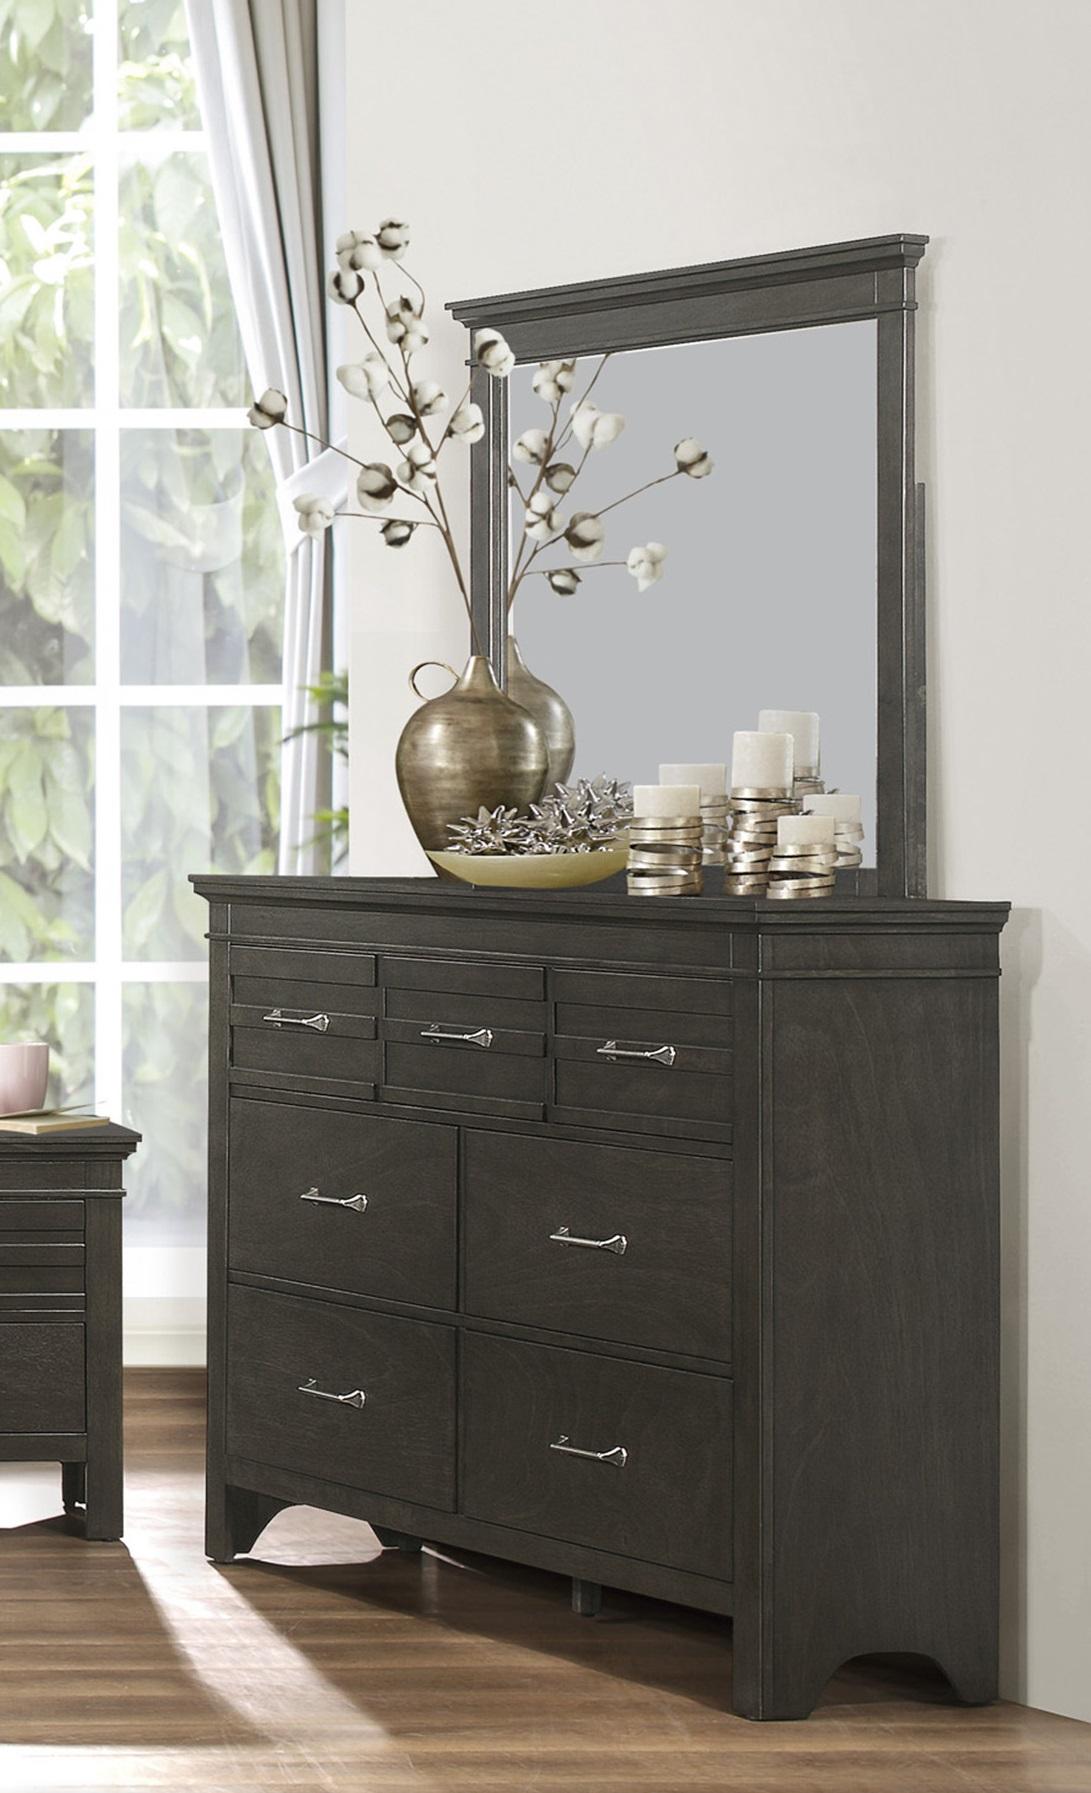 Transitional Dresser w/Mirror 1675-5*6-2PC Blaire Farm 1675-5*6-2PC in Charcoal 